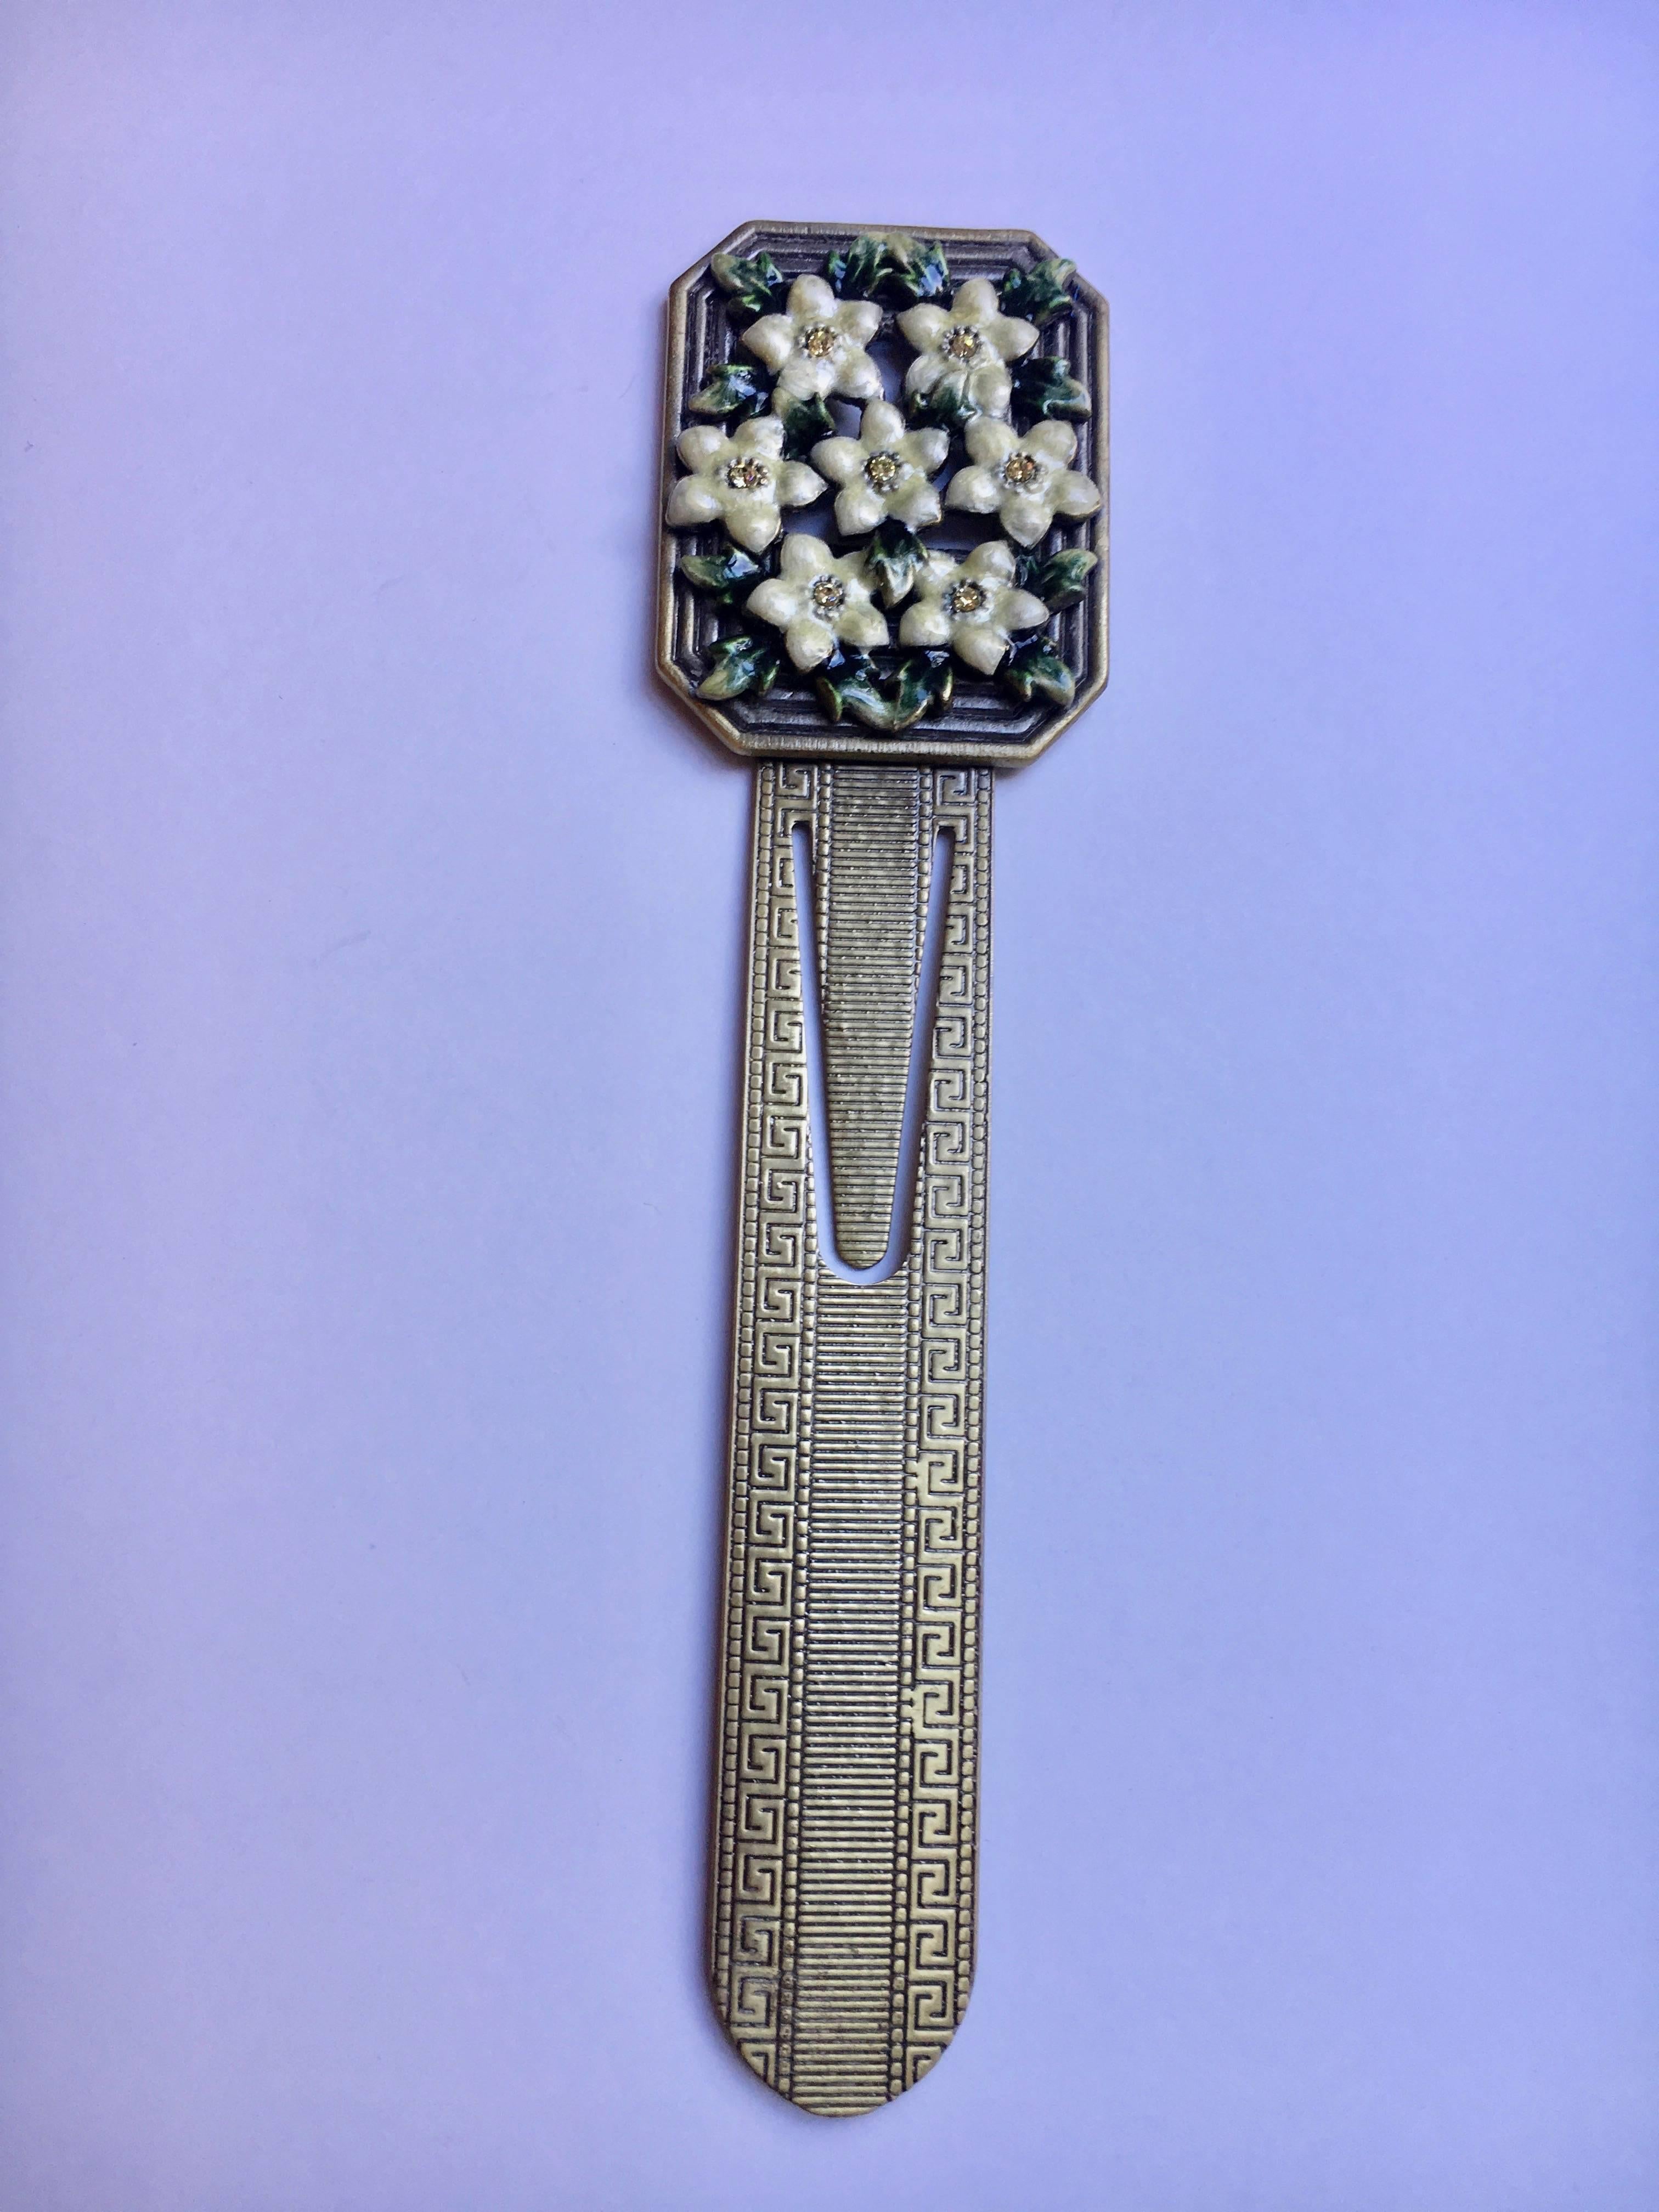 French enamel and Brass Bookmark with Semi Precious stones - perfect for the avid reader who likes to be Novel! This bookmark has a lovely floral detail that sparkles in the reading light.